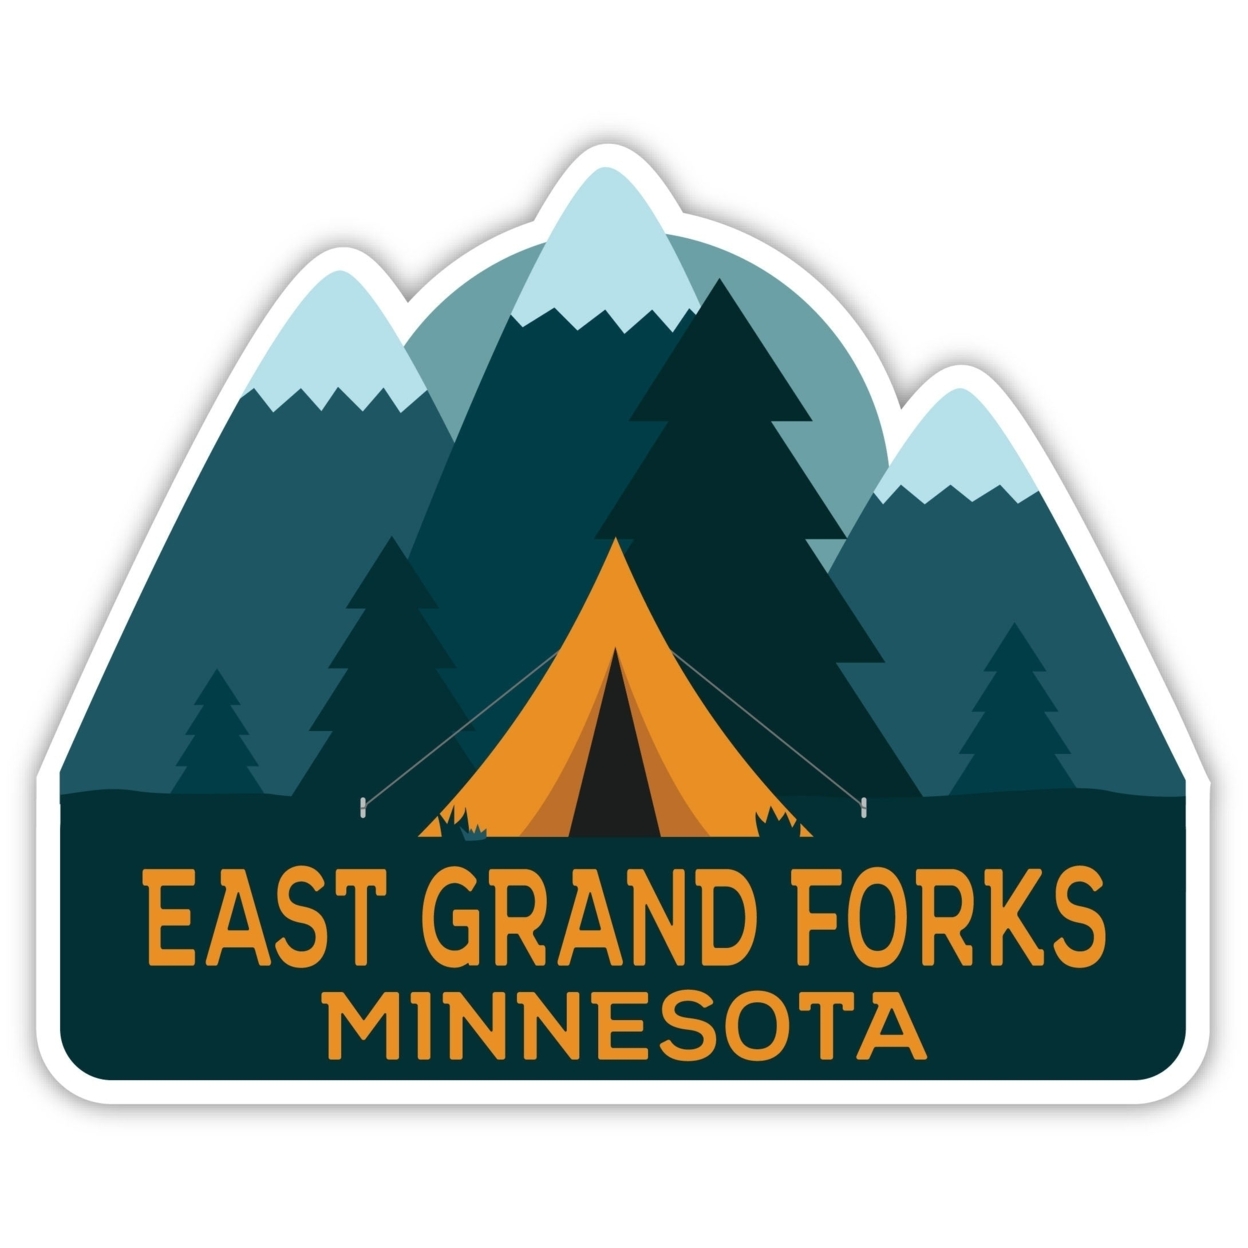 East Grand Forks Minnesota Souvenir Decorative Stickers (Choose Theme And Size) - Single Unit, 12-Inch, Tent